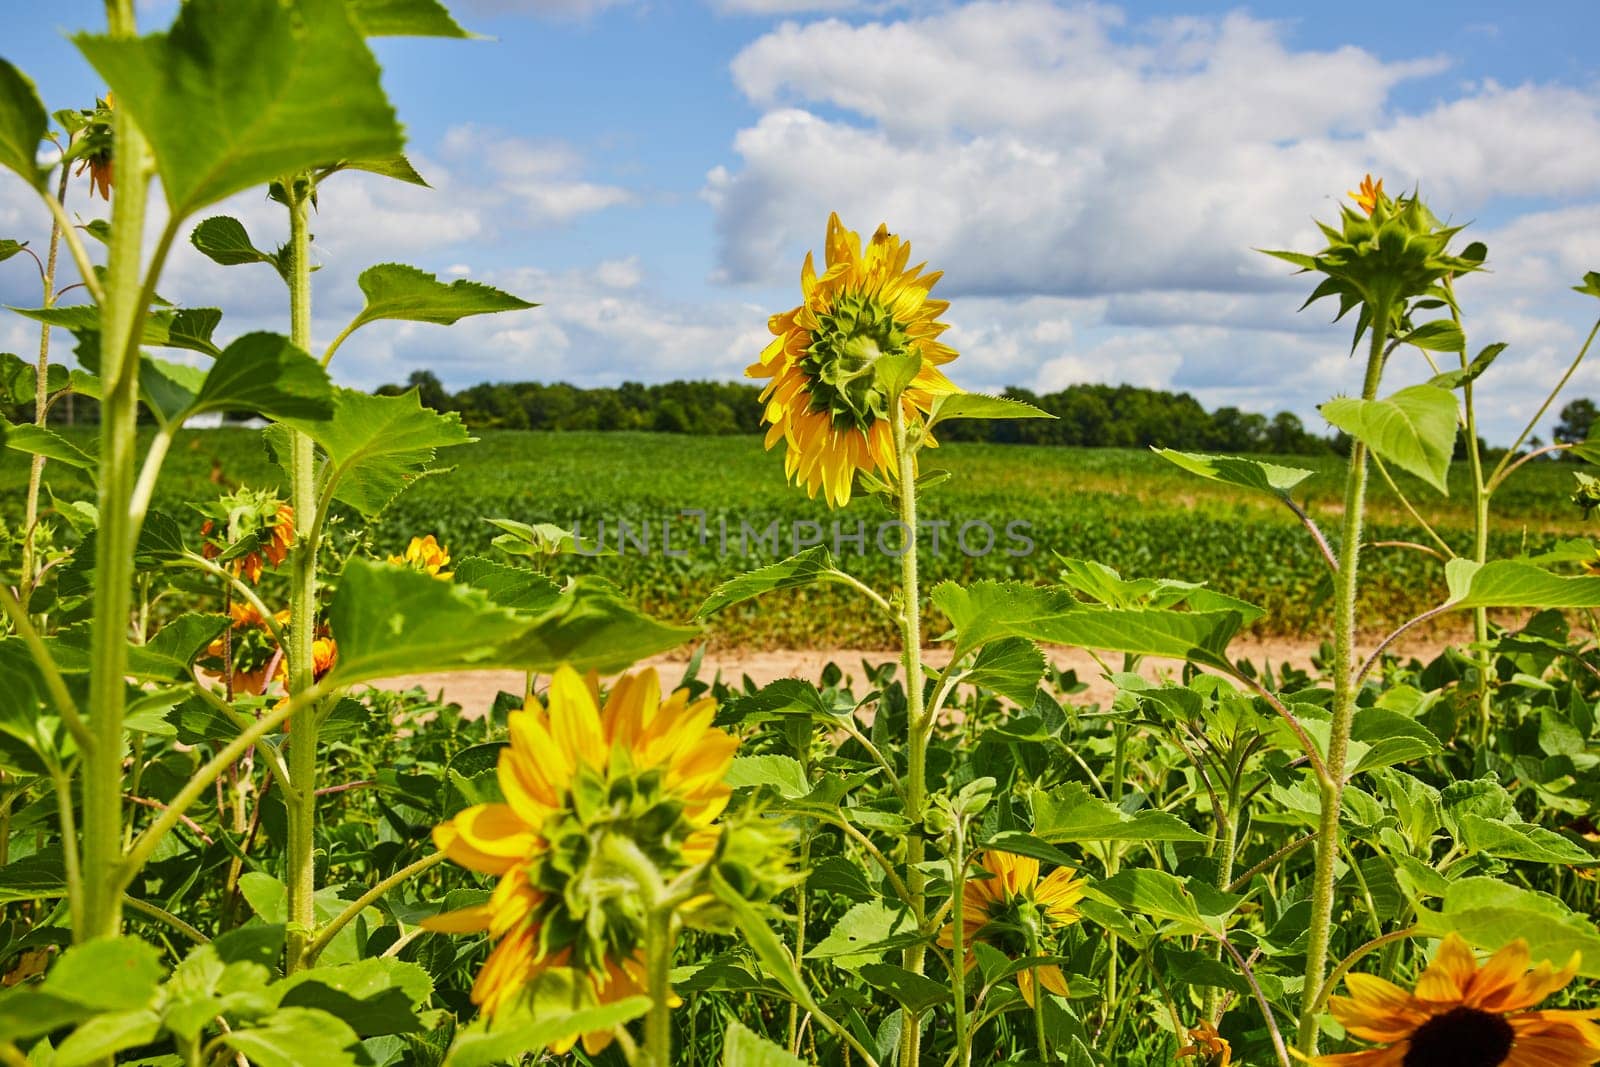 Image of Bright sunny day with back of sunflowers overlooking crops and dirt road